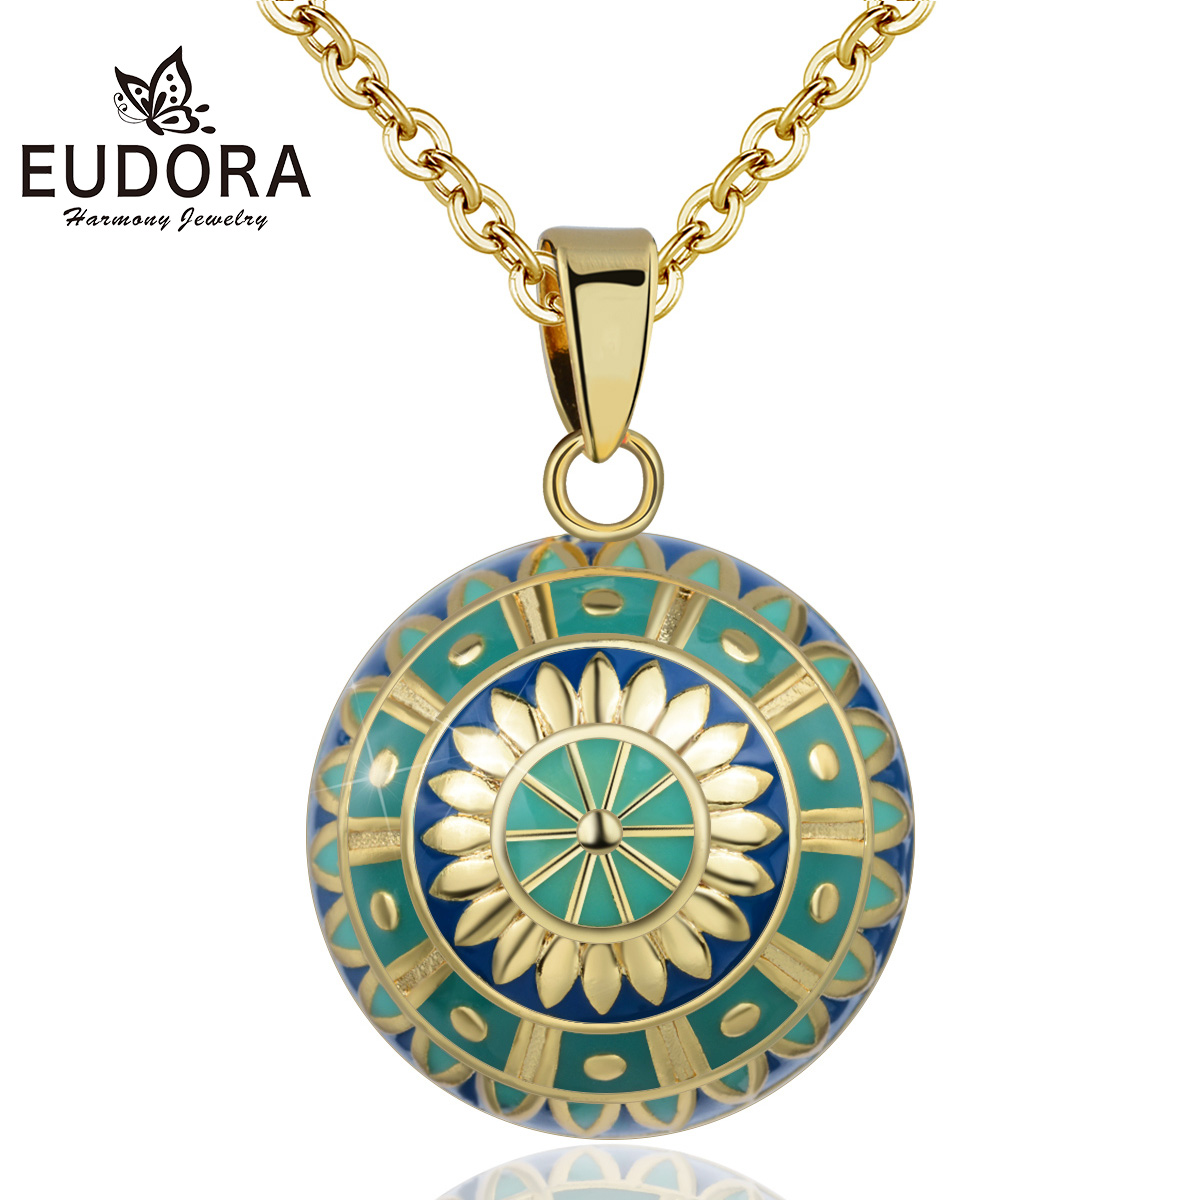 Eudora Green Harmony Pregnancy ball Necklace Pregnancy bola ball pendant with Sun Flower Luxury Jewelry for Women Shower gift